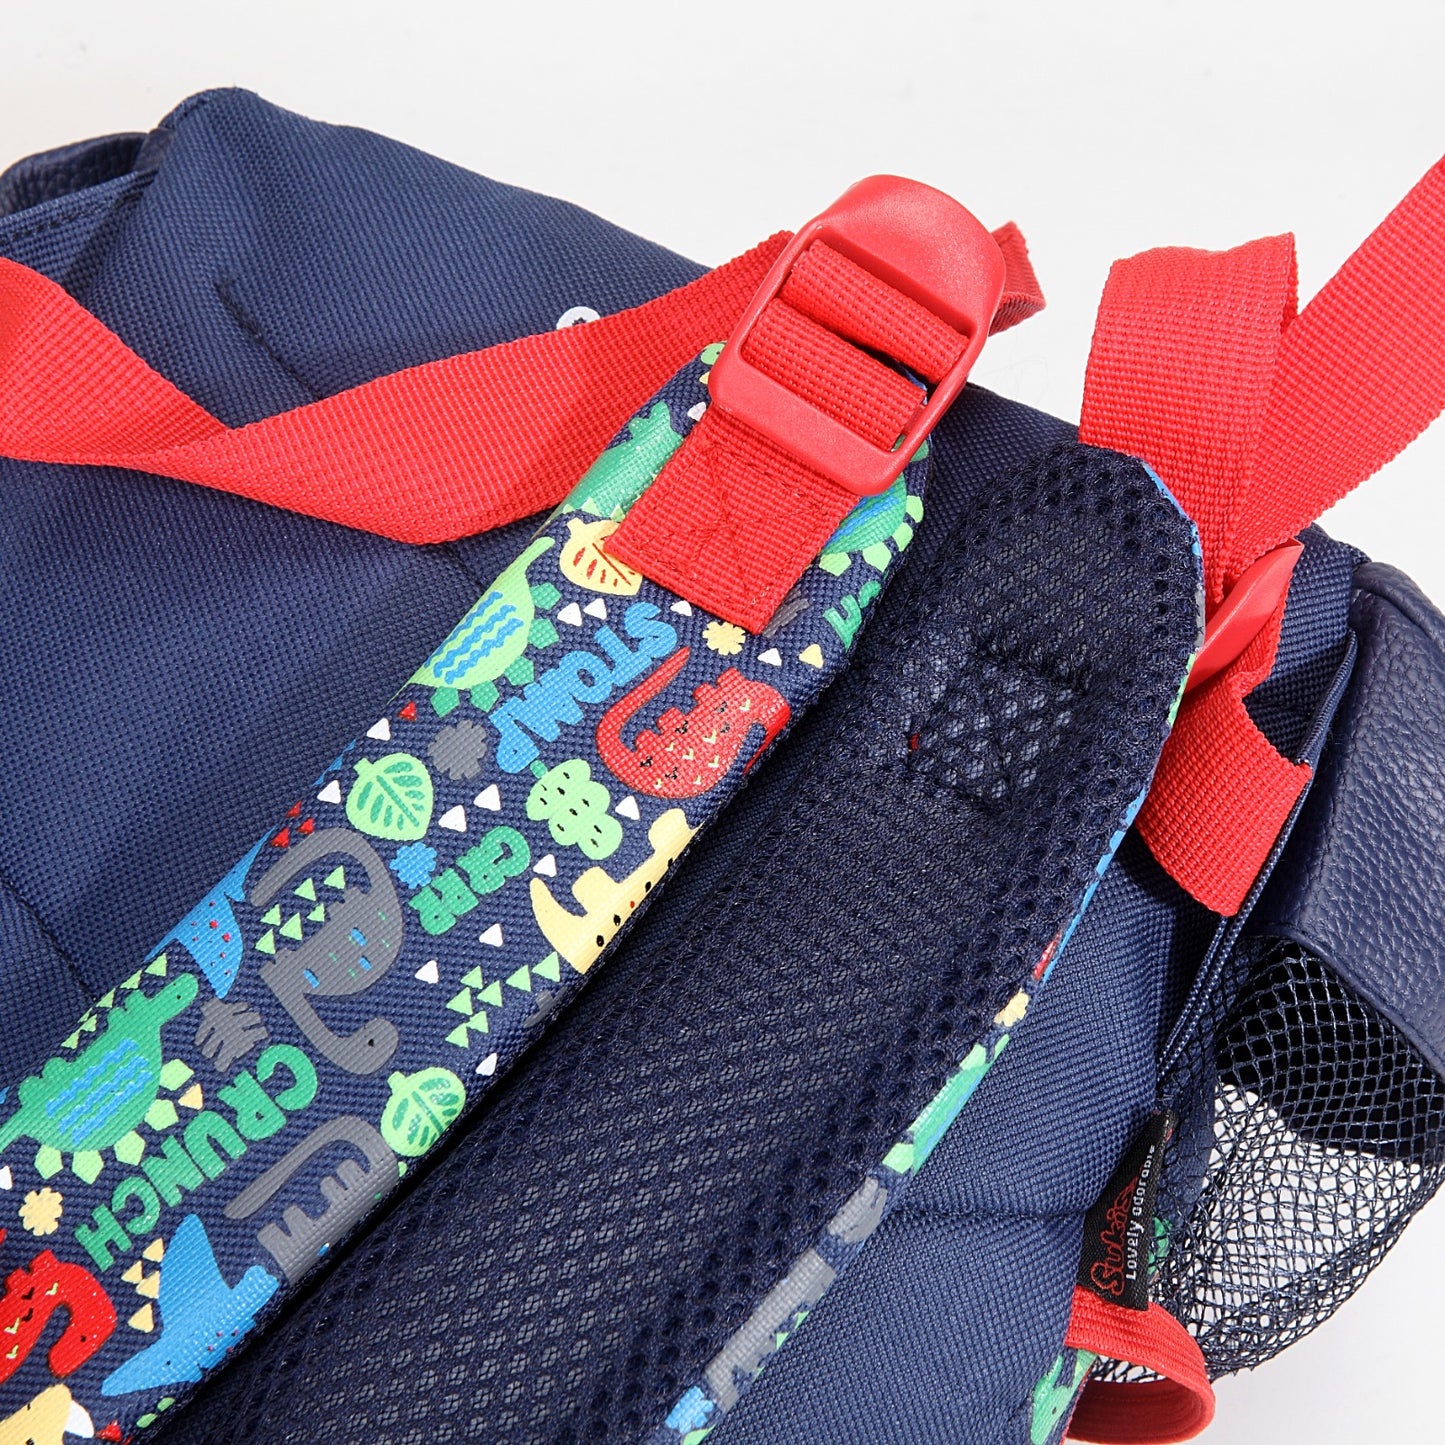 Teeny Tiny Dino Backpacks - Little Partner to Carry All Essentials !!